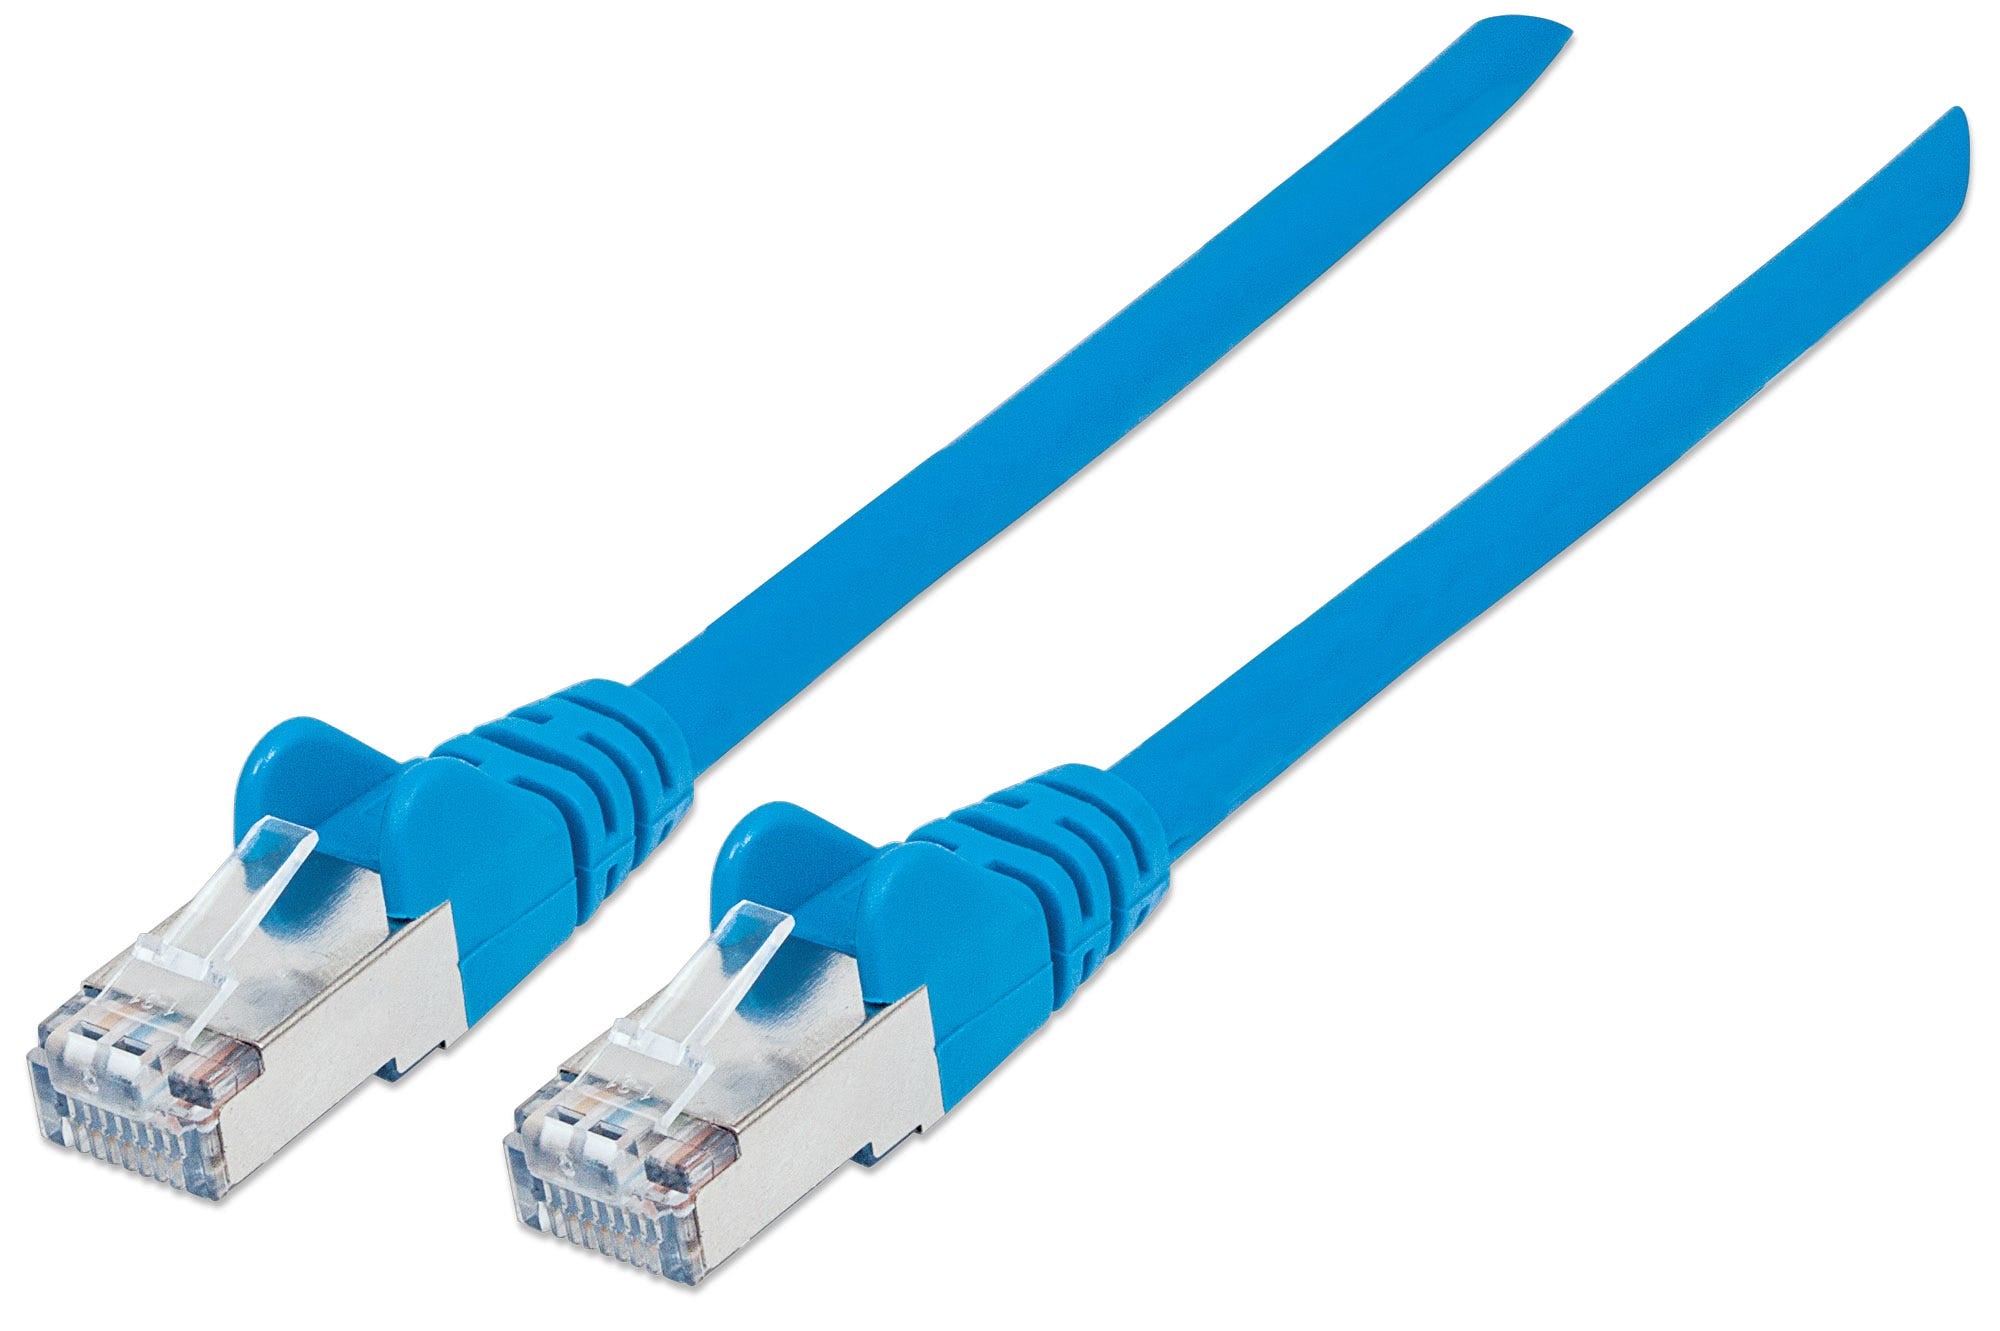 Intellinet Network Patch Cable, Cat6, 5m, Blue, Copper, S/FTP, LSOH / LSZH, PVC, RJ45, Gold Plated Contacts, Snagless, Booted, Lifetime Warranty, Polybag